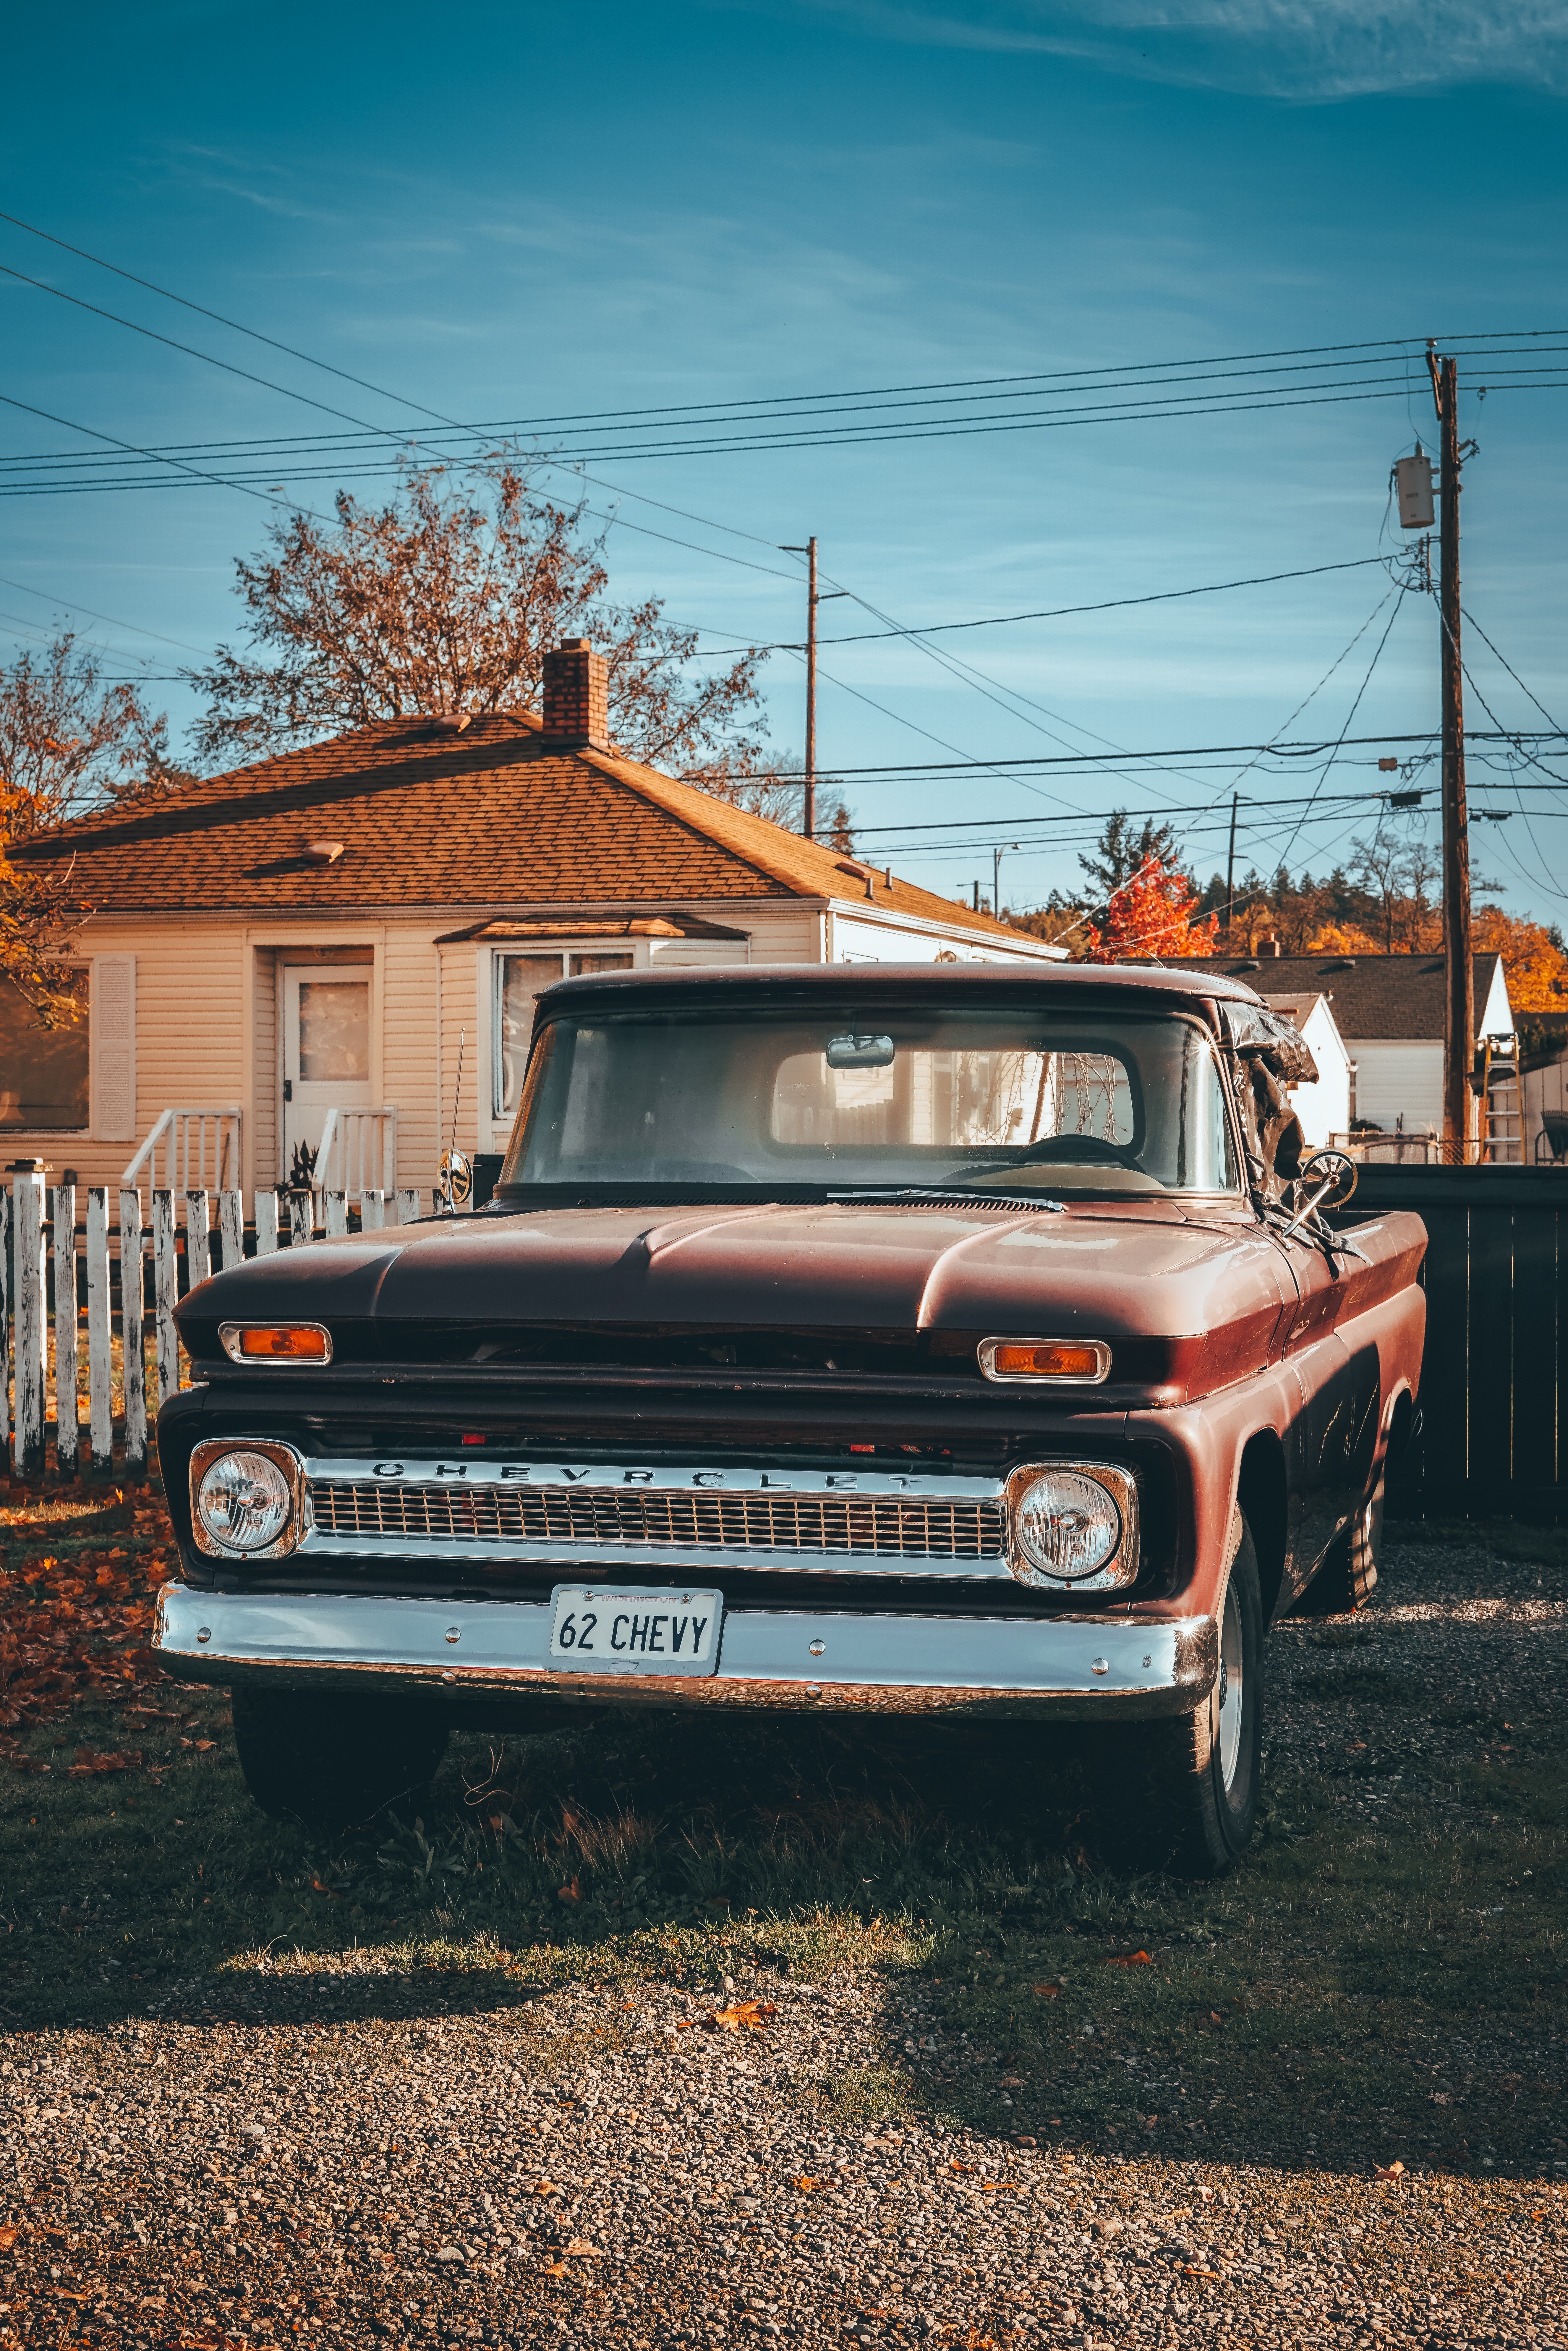 Michael spotted Kevin preparing his bed behind a pickup truck. | Source: Pexels